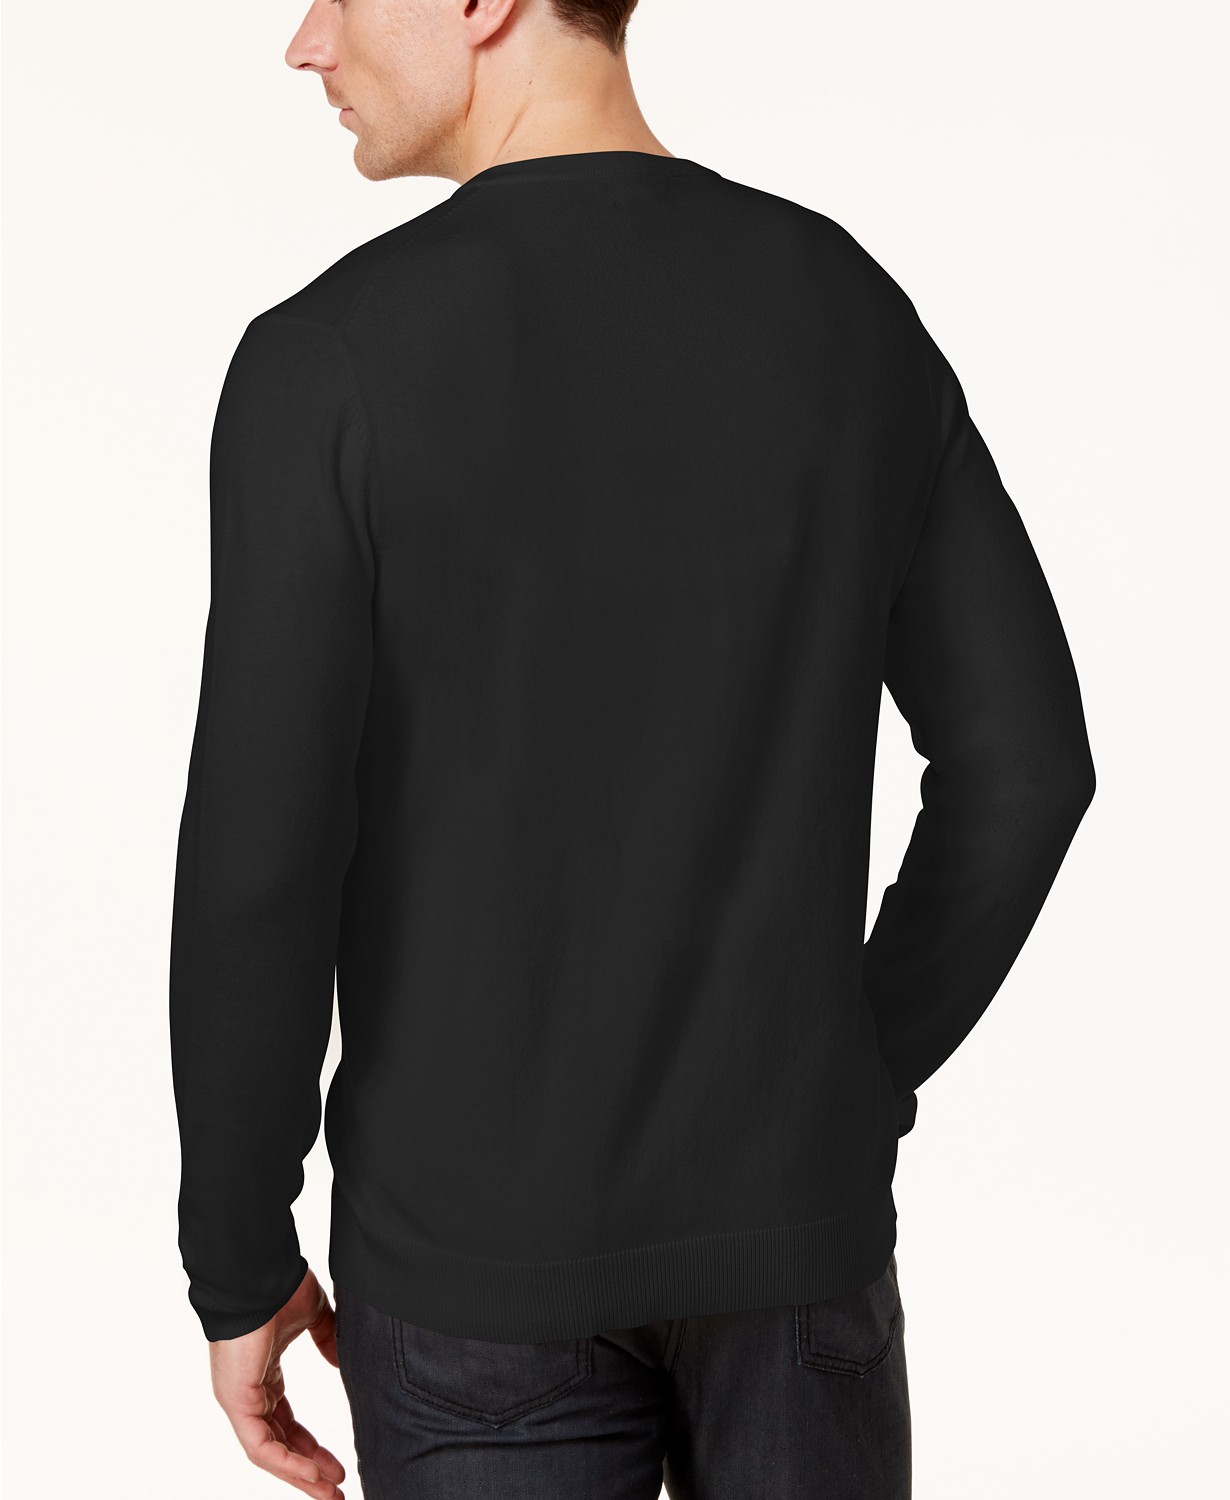 www.couturepoint.com-alfani-mens-black-solid-v-neck-long-sleeves-sweater